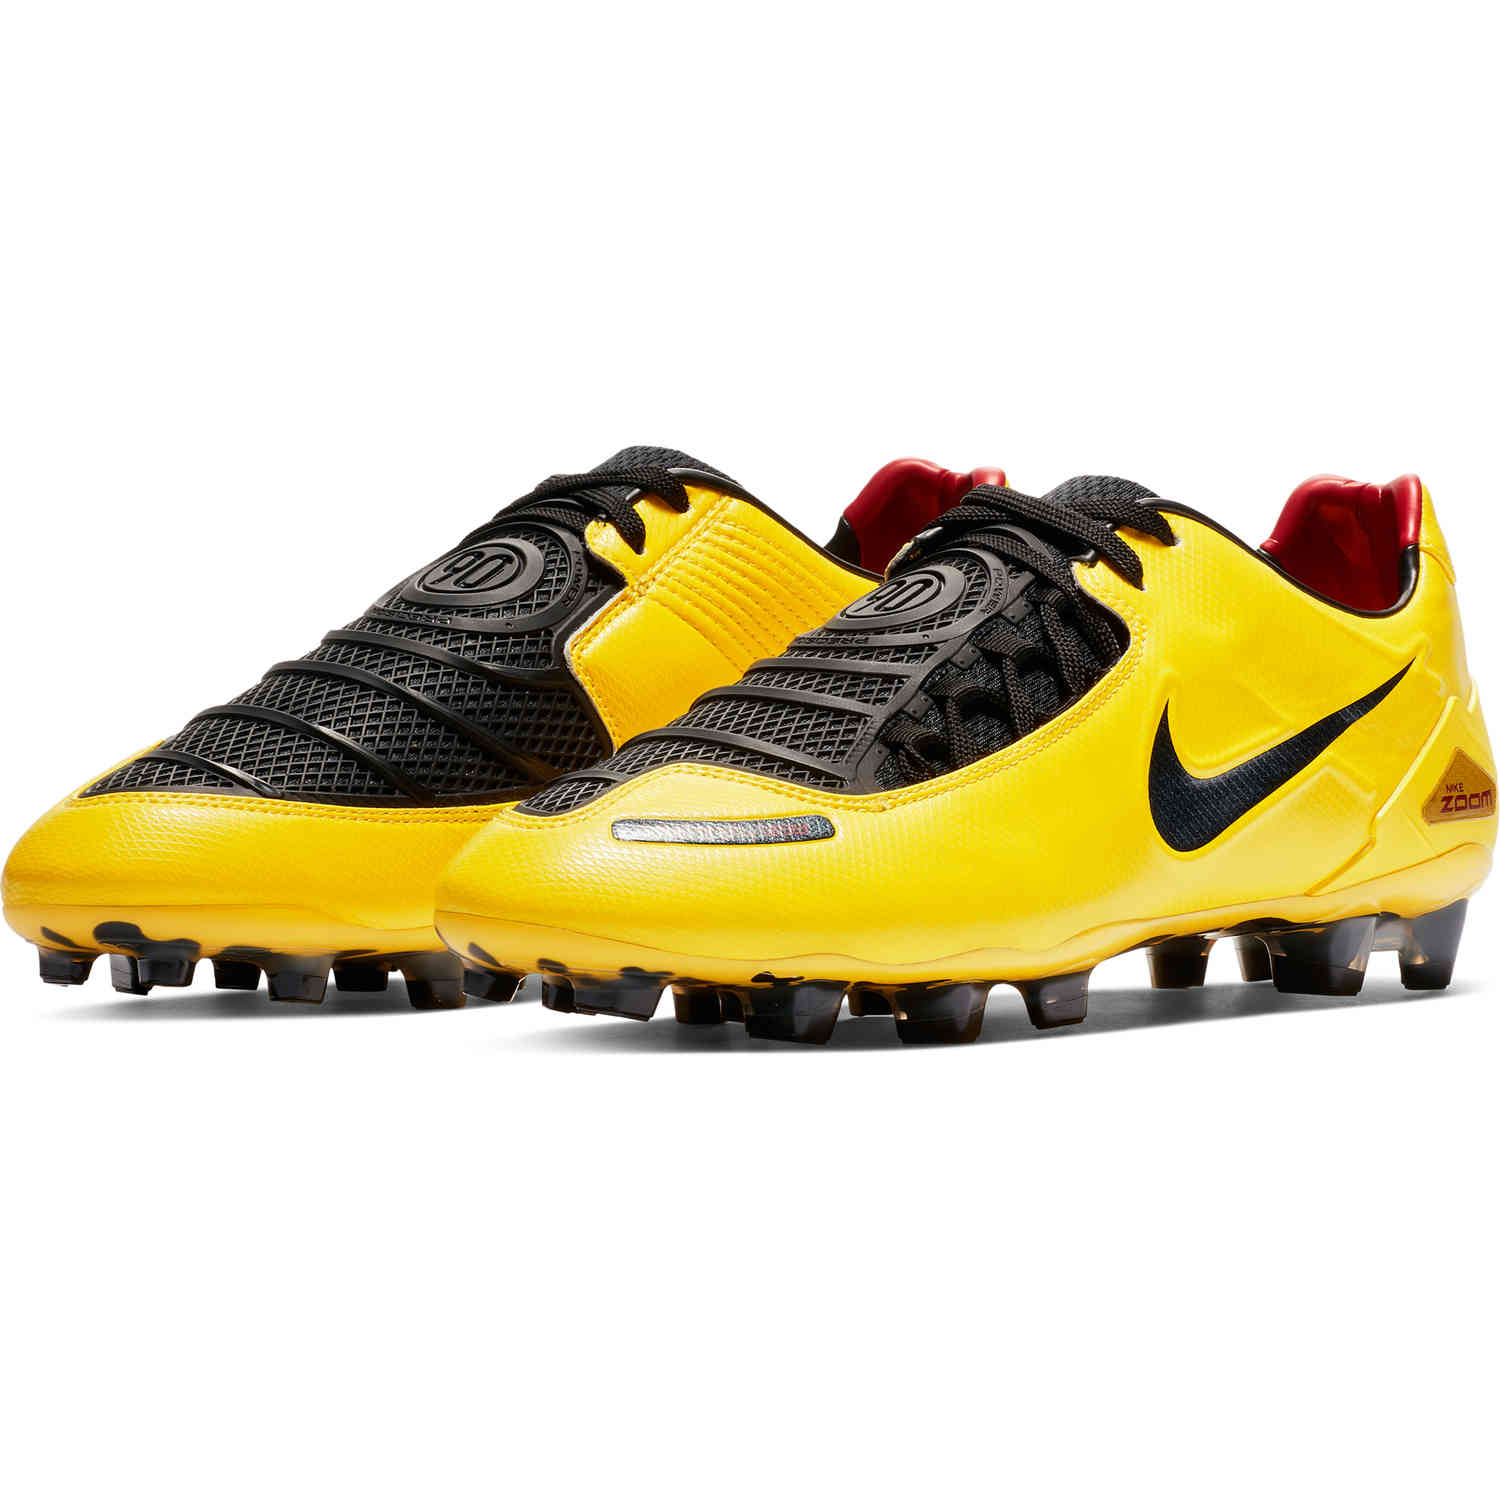 Nike Total 90 Laser Limited Edition FG 